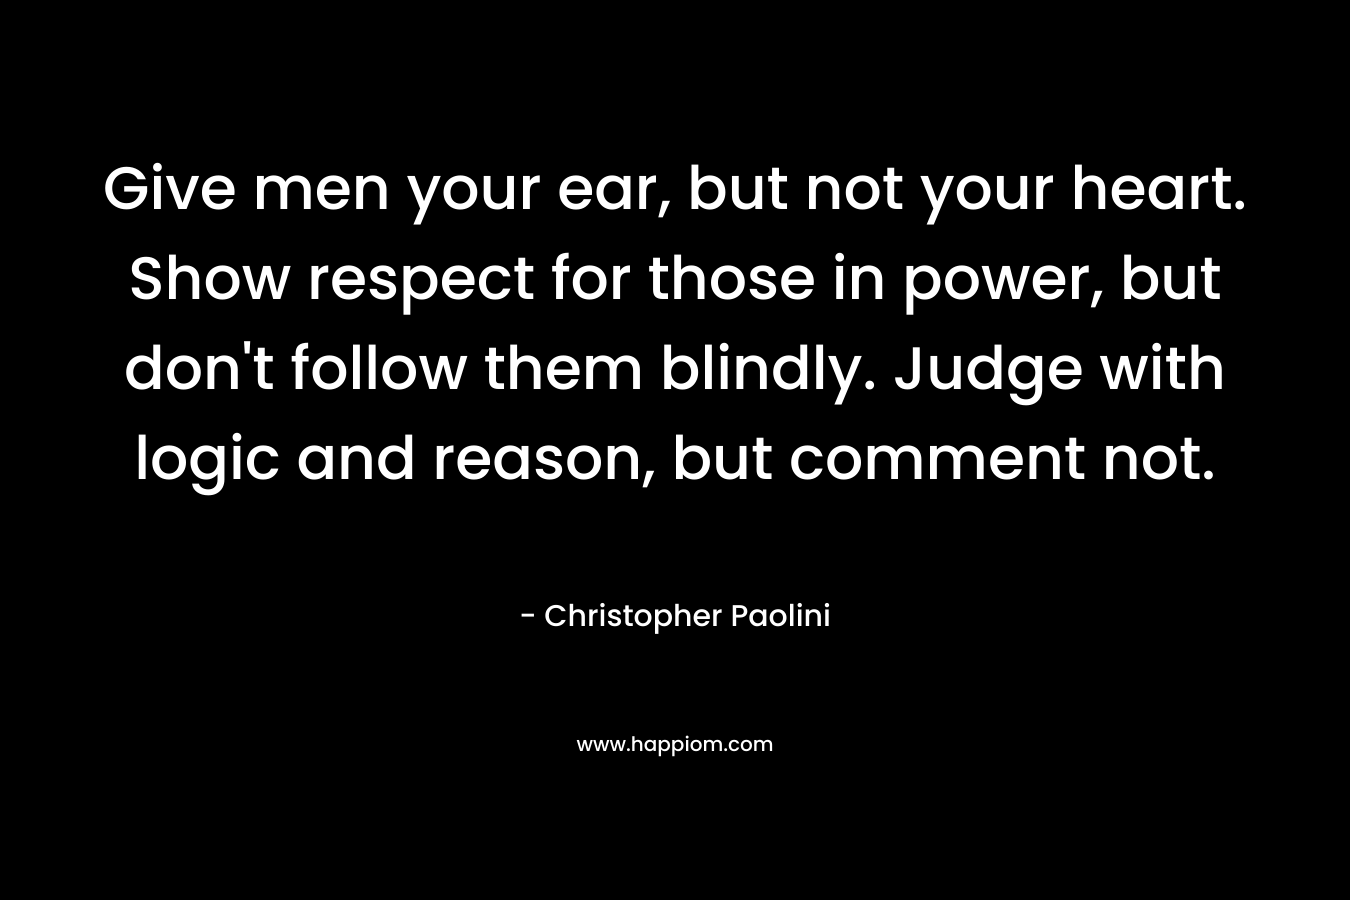 Give men your ear, but not your heart. Show respect for those in power, but don't follow them blindly. Judge with logic and reason, but comment not.